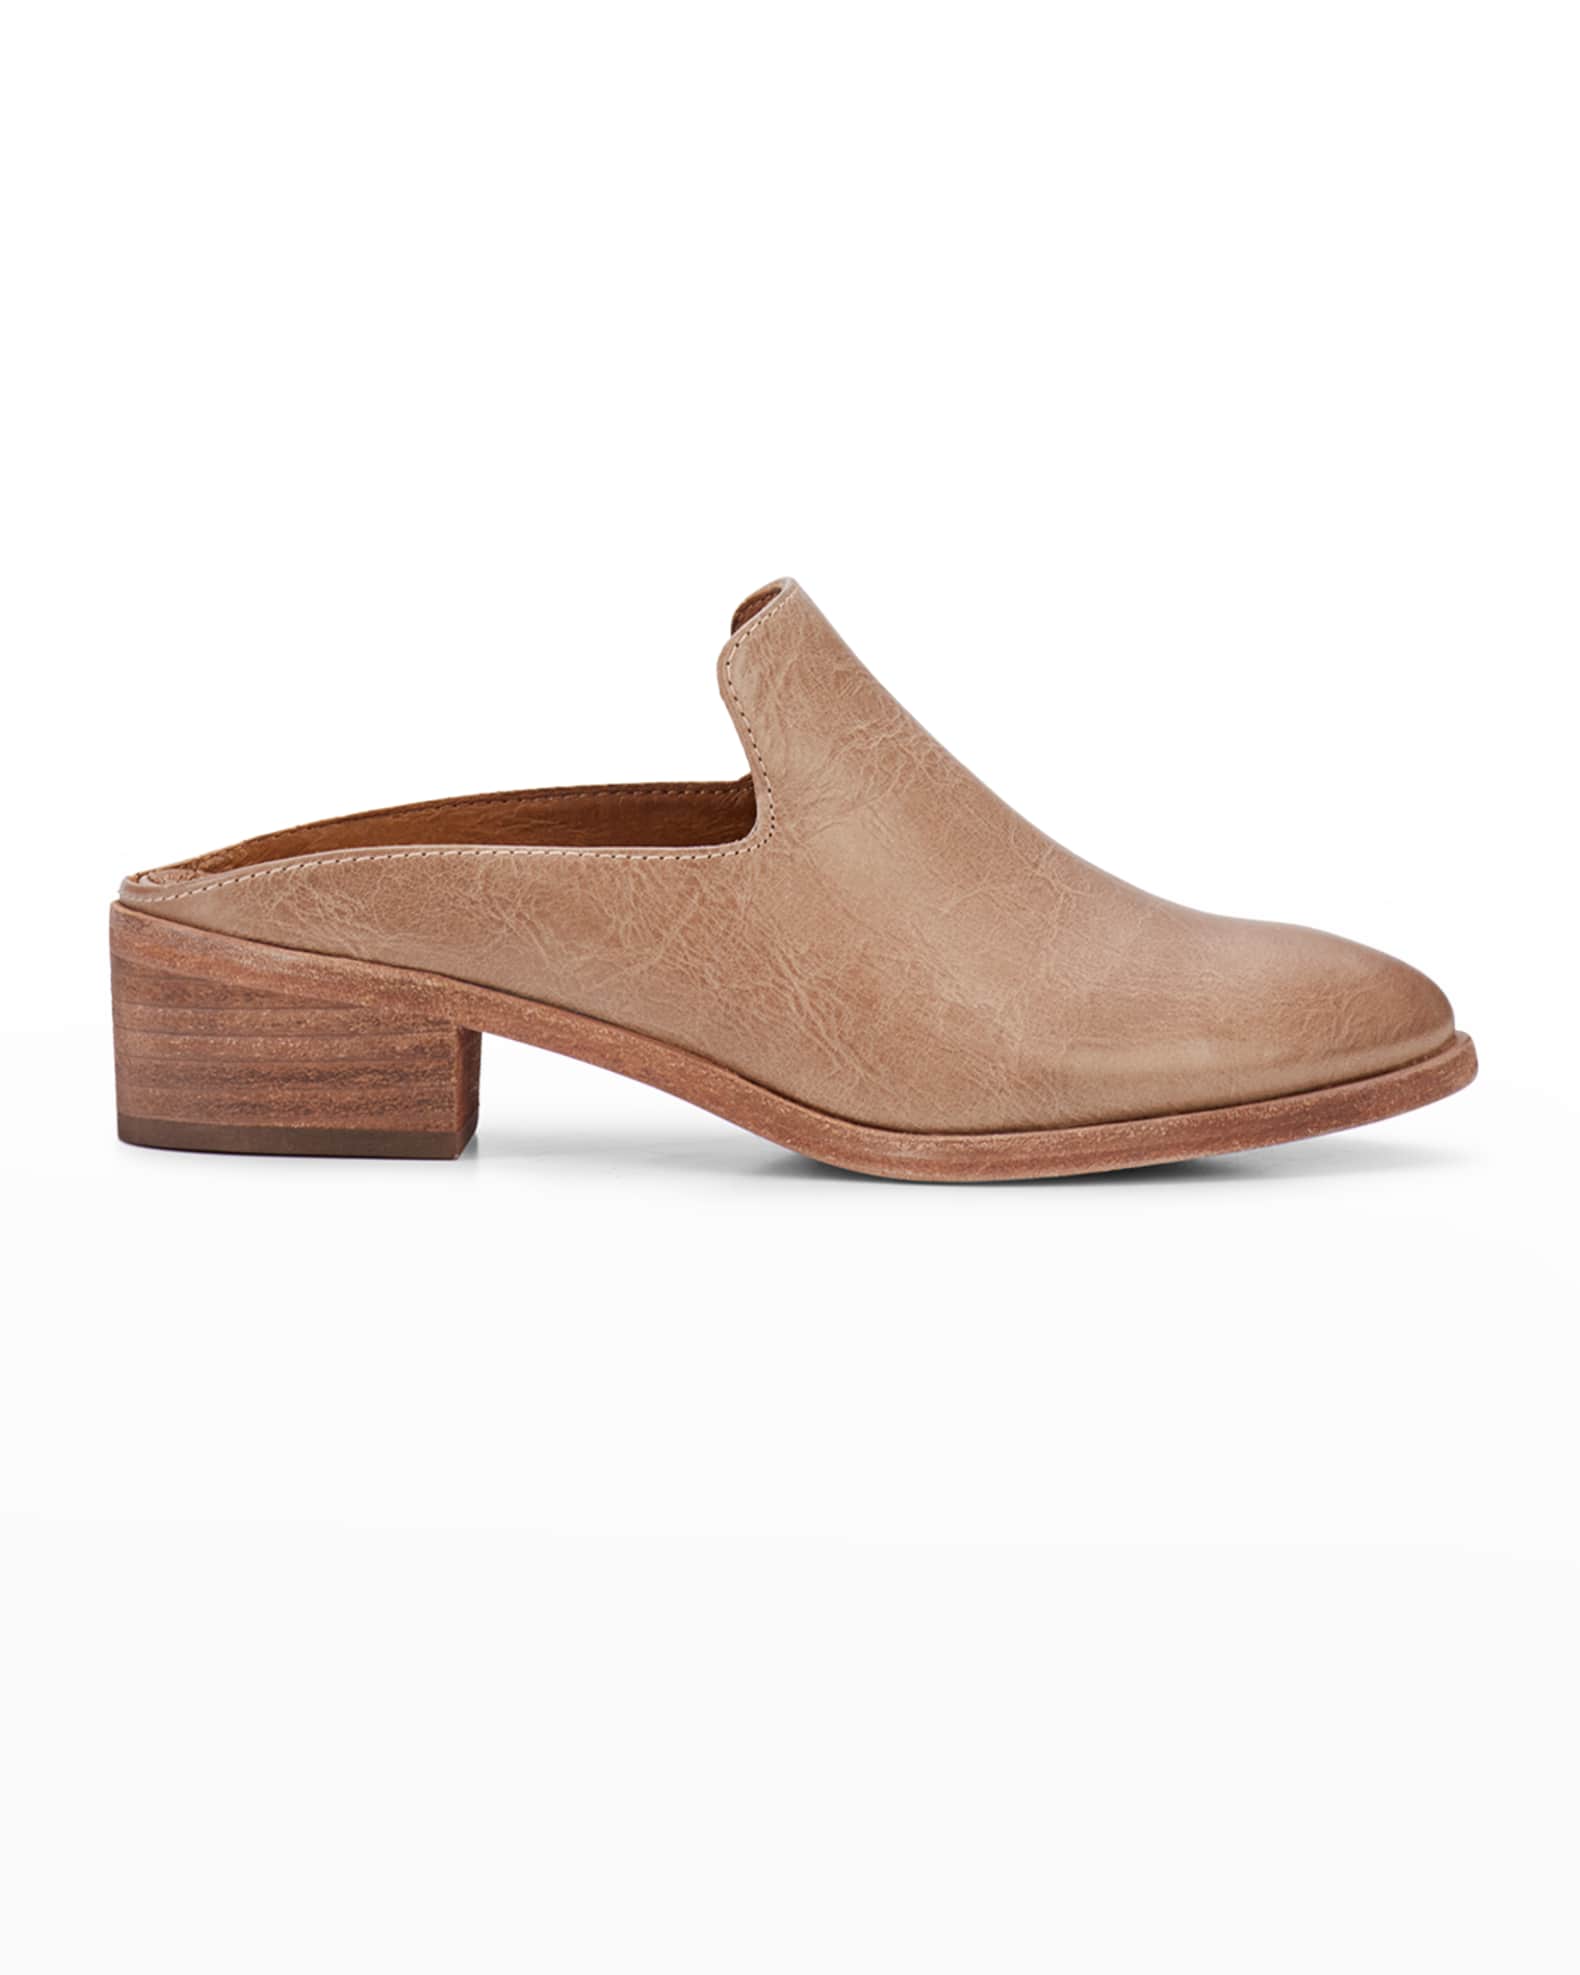 Frye Ray Leather Slide Mules | Neiman Marcus